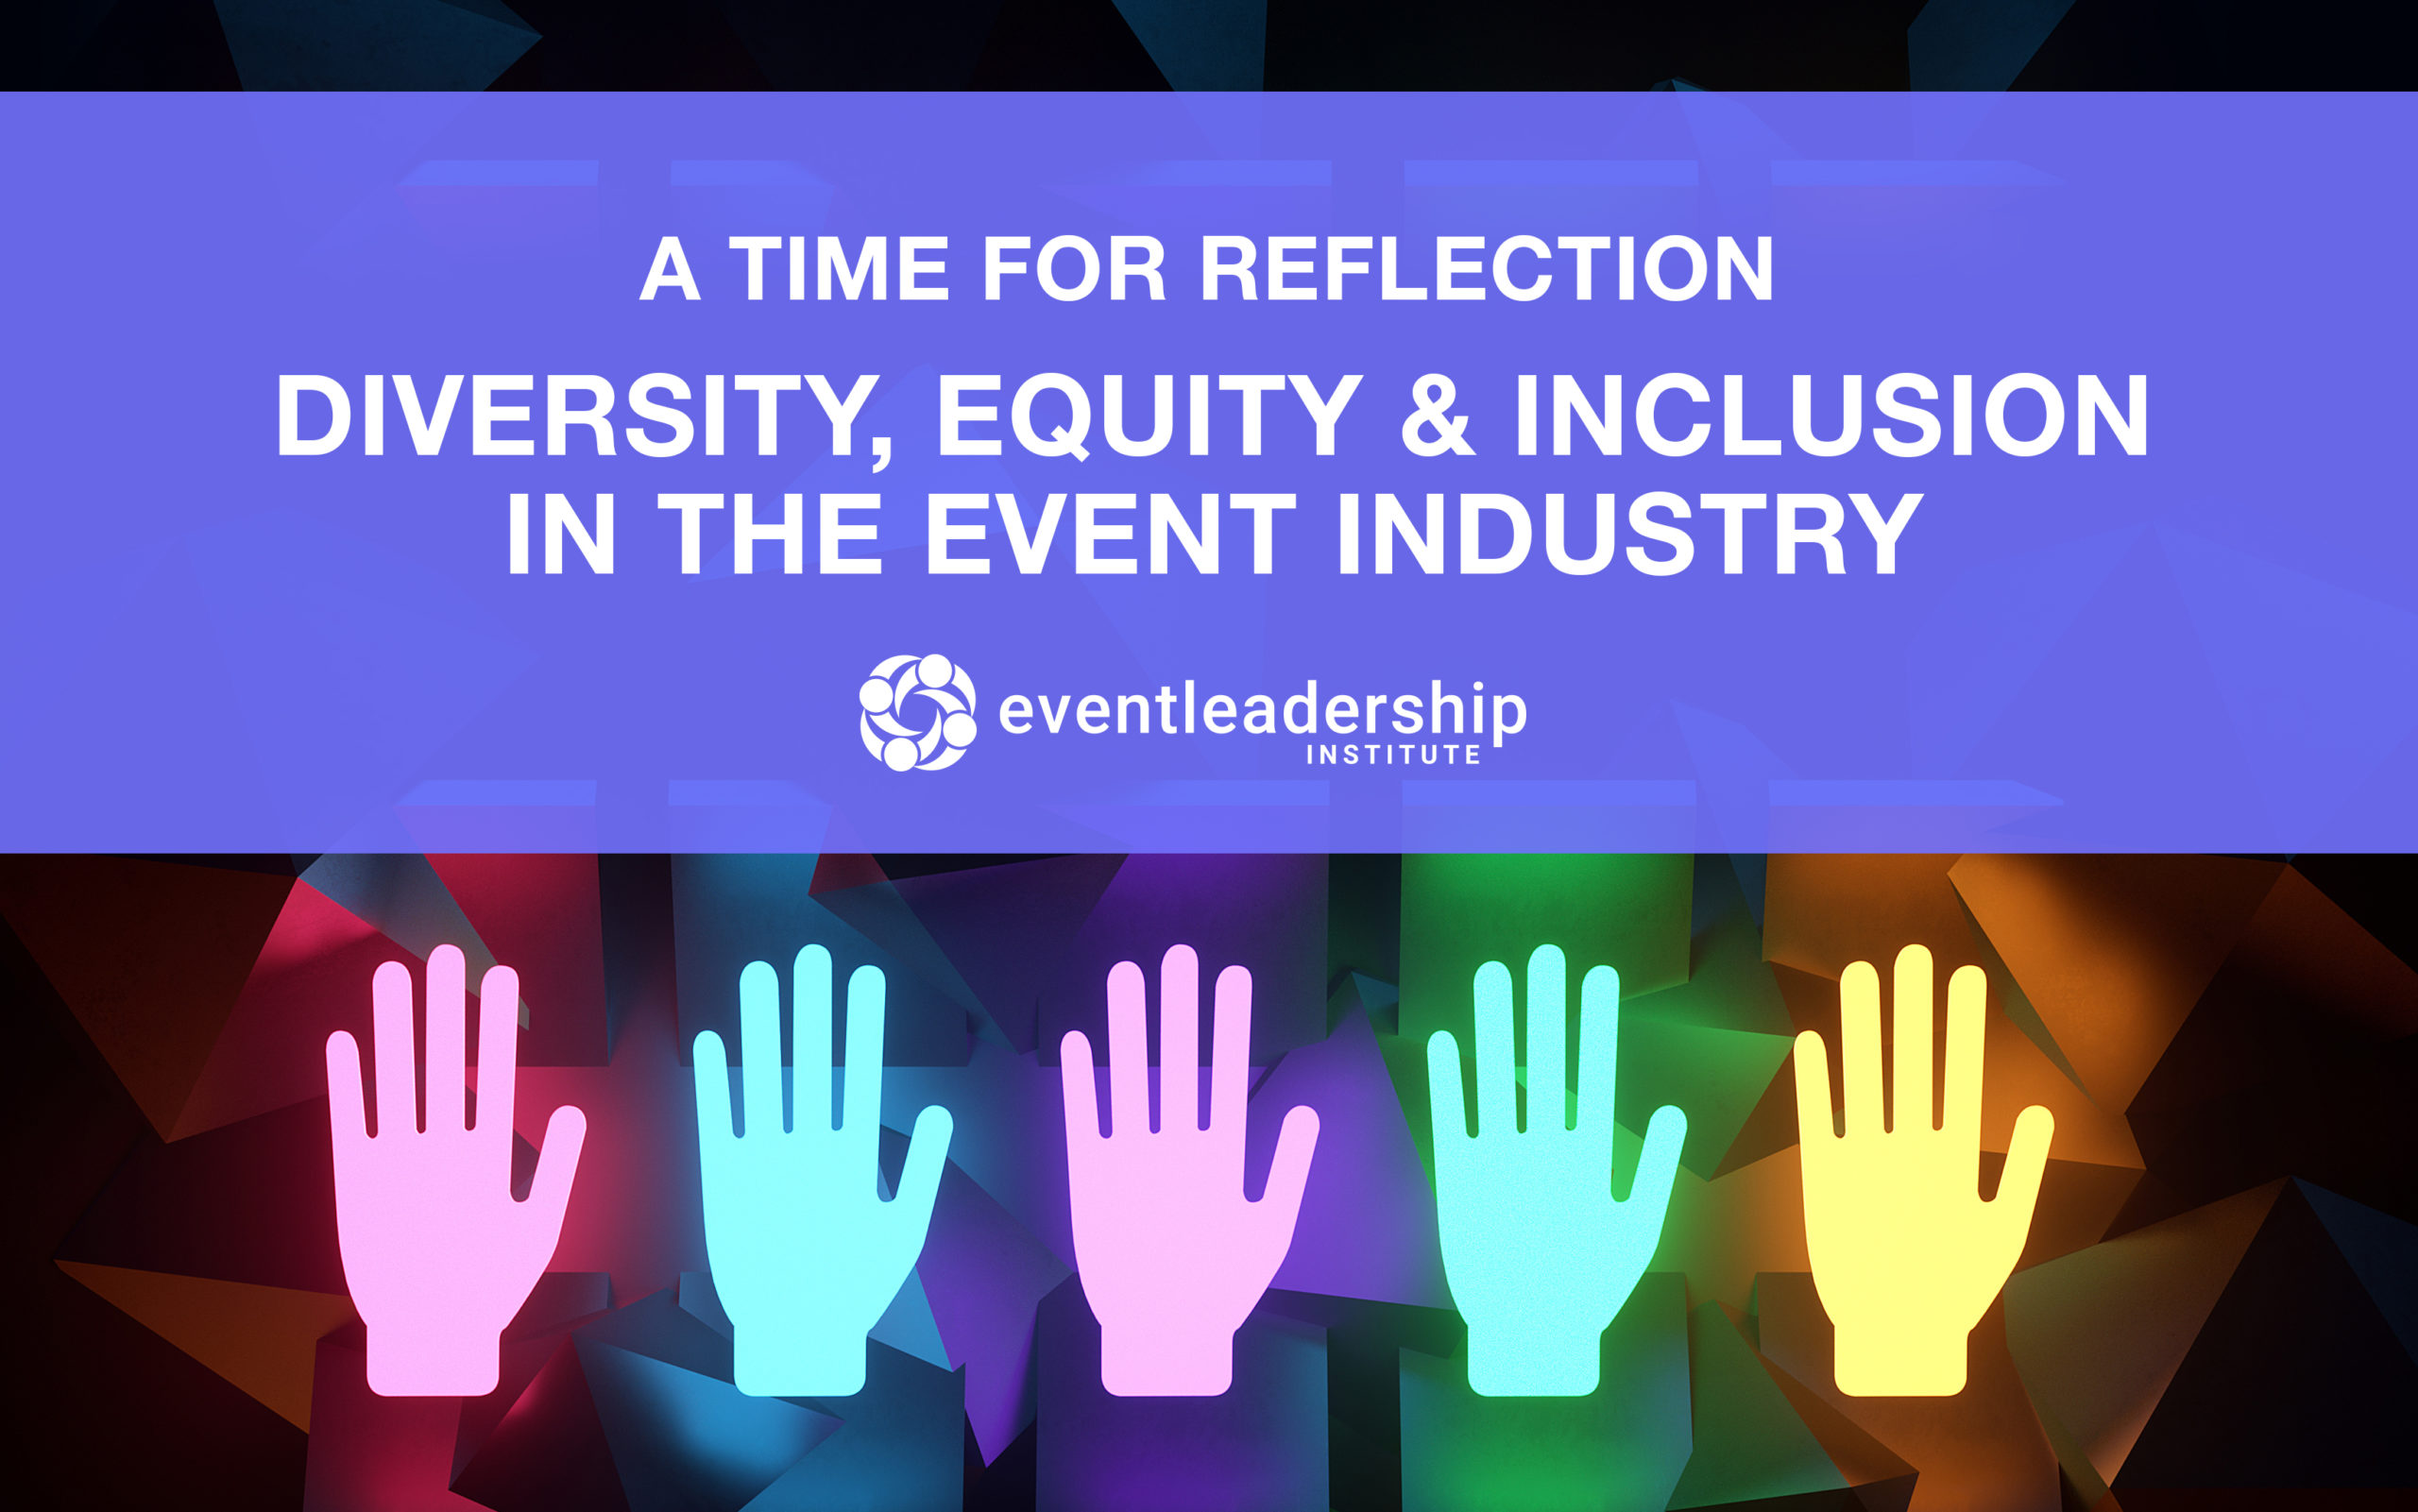 A Time for Reflection & Change: Diversity, Equity & Inclusion in the Event Industry (Recorded February 25, 2021)